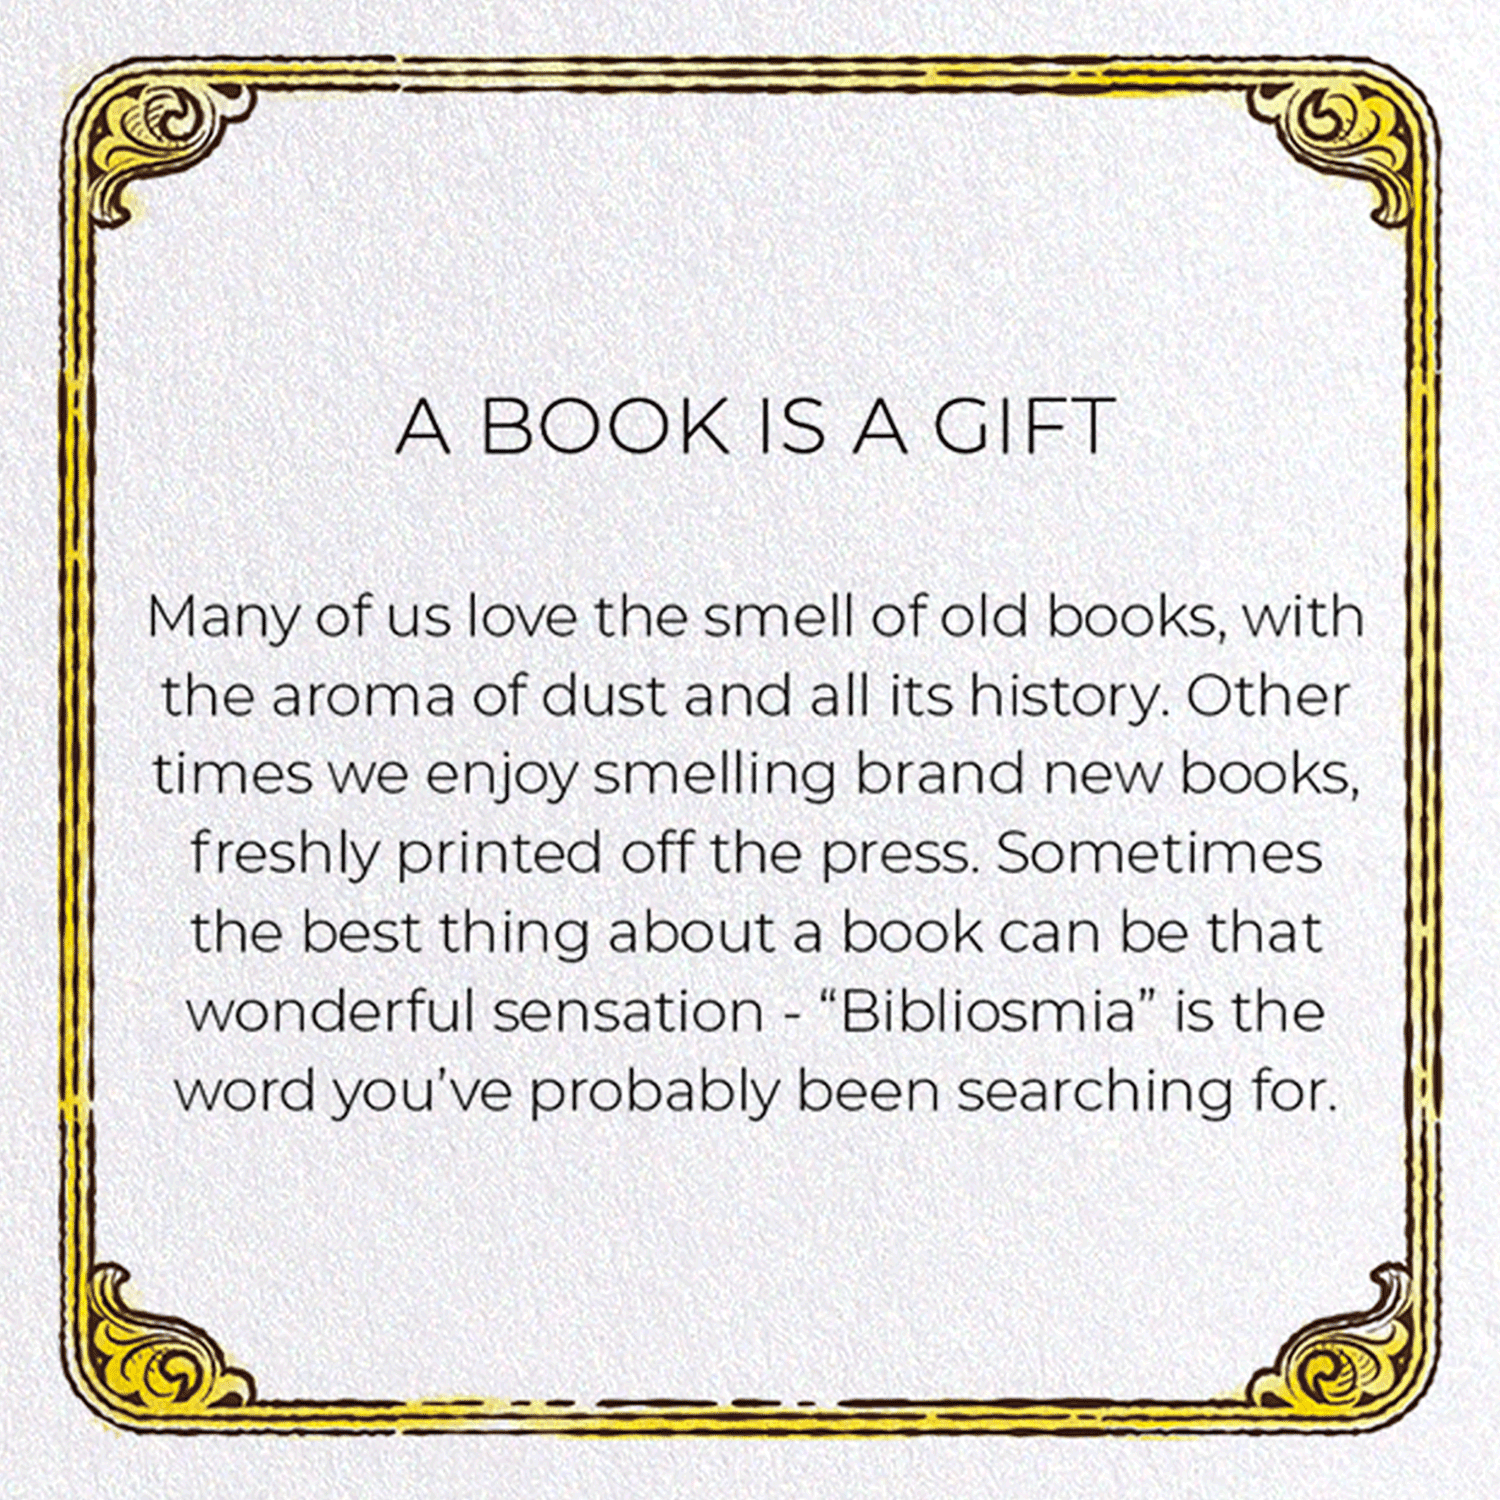 A BOOK IS A GIFT